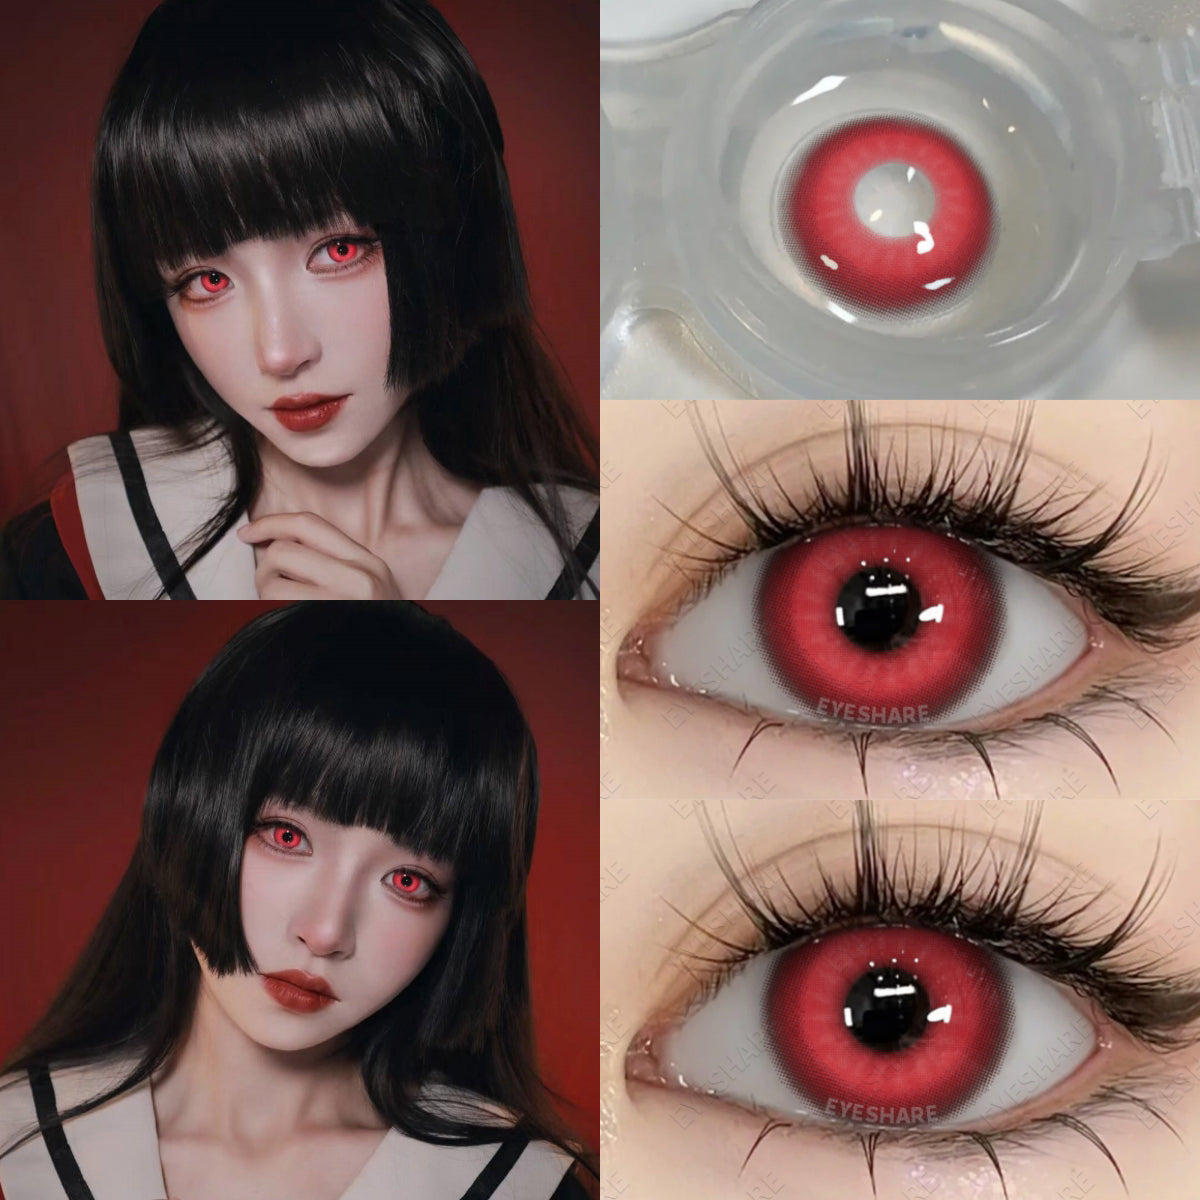 Anime Cosplay Coloured Contact Lenses - Full Black - $29.99 - The Mad Shop